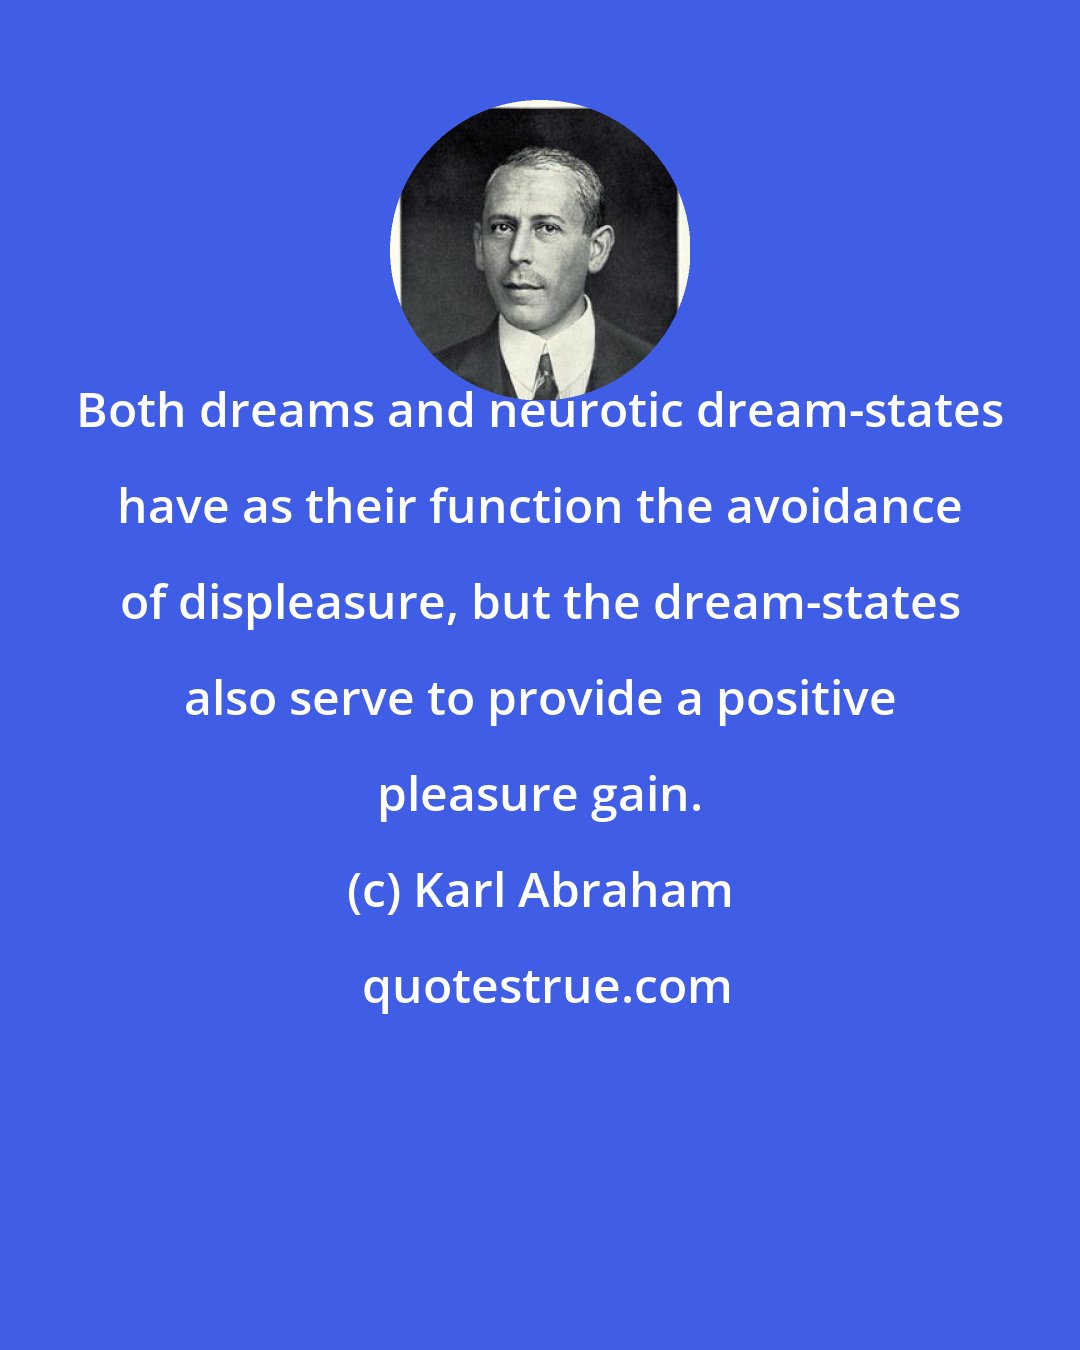 Karl Abraham: Both dreams and neurotic dream-states have as their function the avoidance of displeasure, but the dream-states also serve to provide a positive pleasure gain.